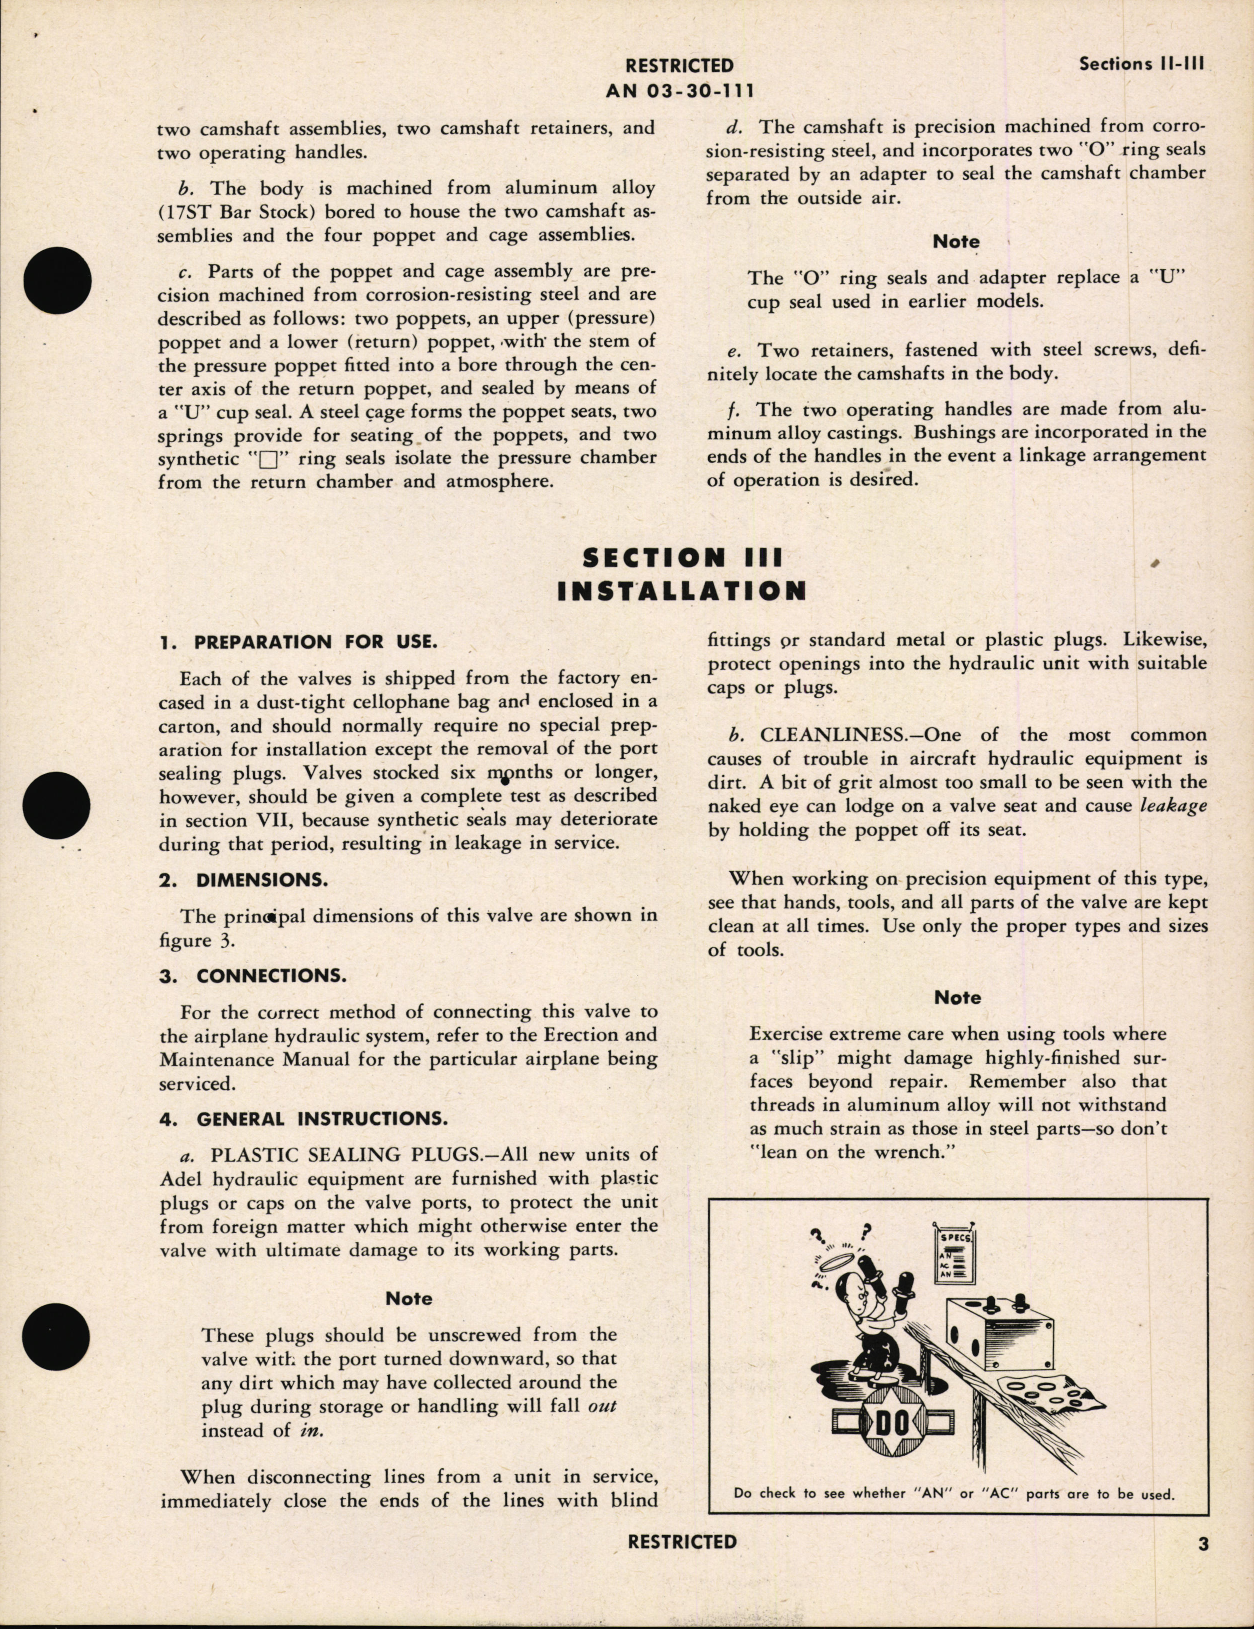 Sample page 7 from AirCorps Library document: Handbook of Instructions with Parts Catalog for Steel Seat Hydraulic Selector Valves